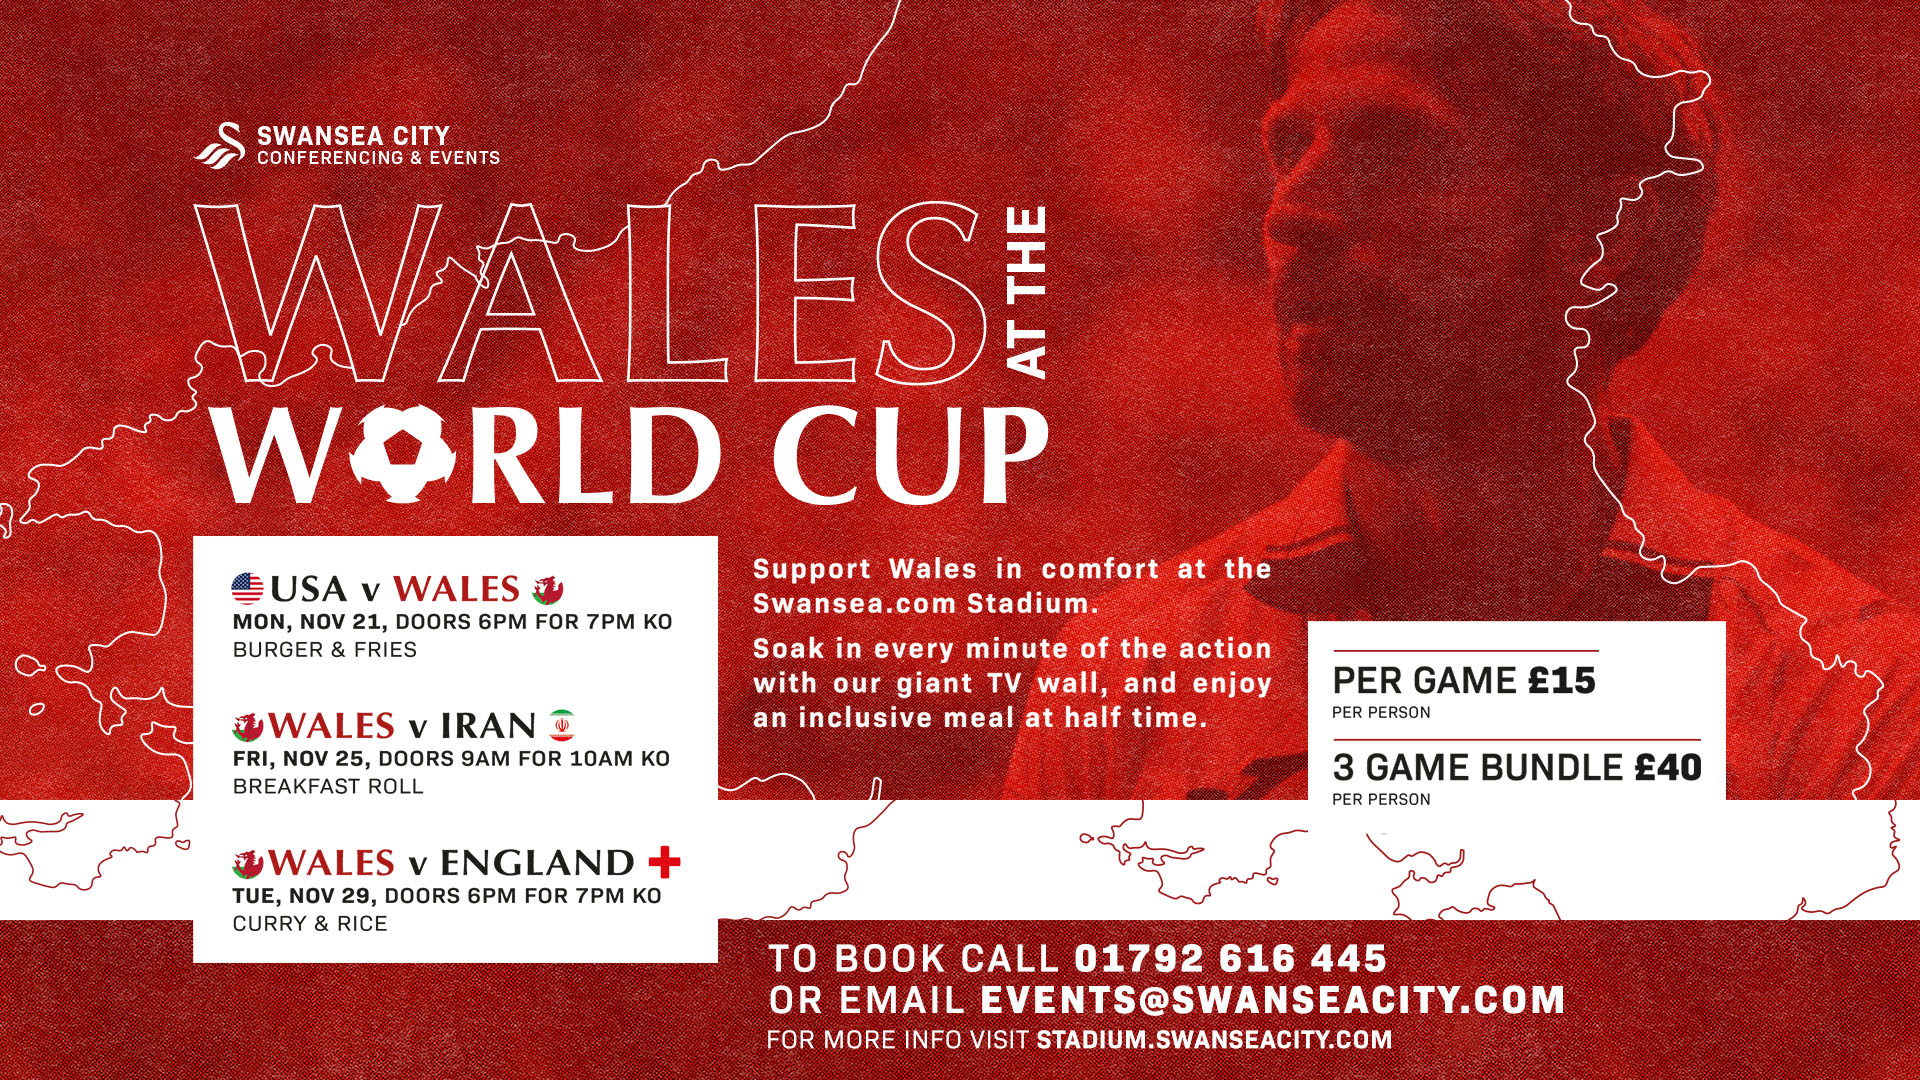 Wales at the world cup event graphic - showing dates and times of the event contained within the article